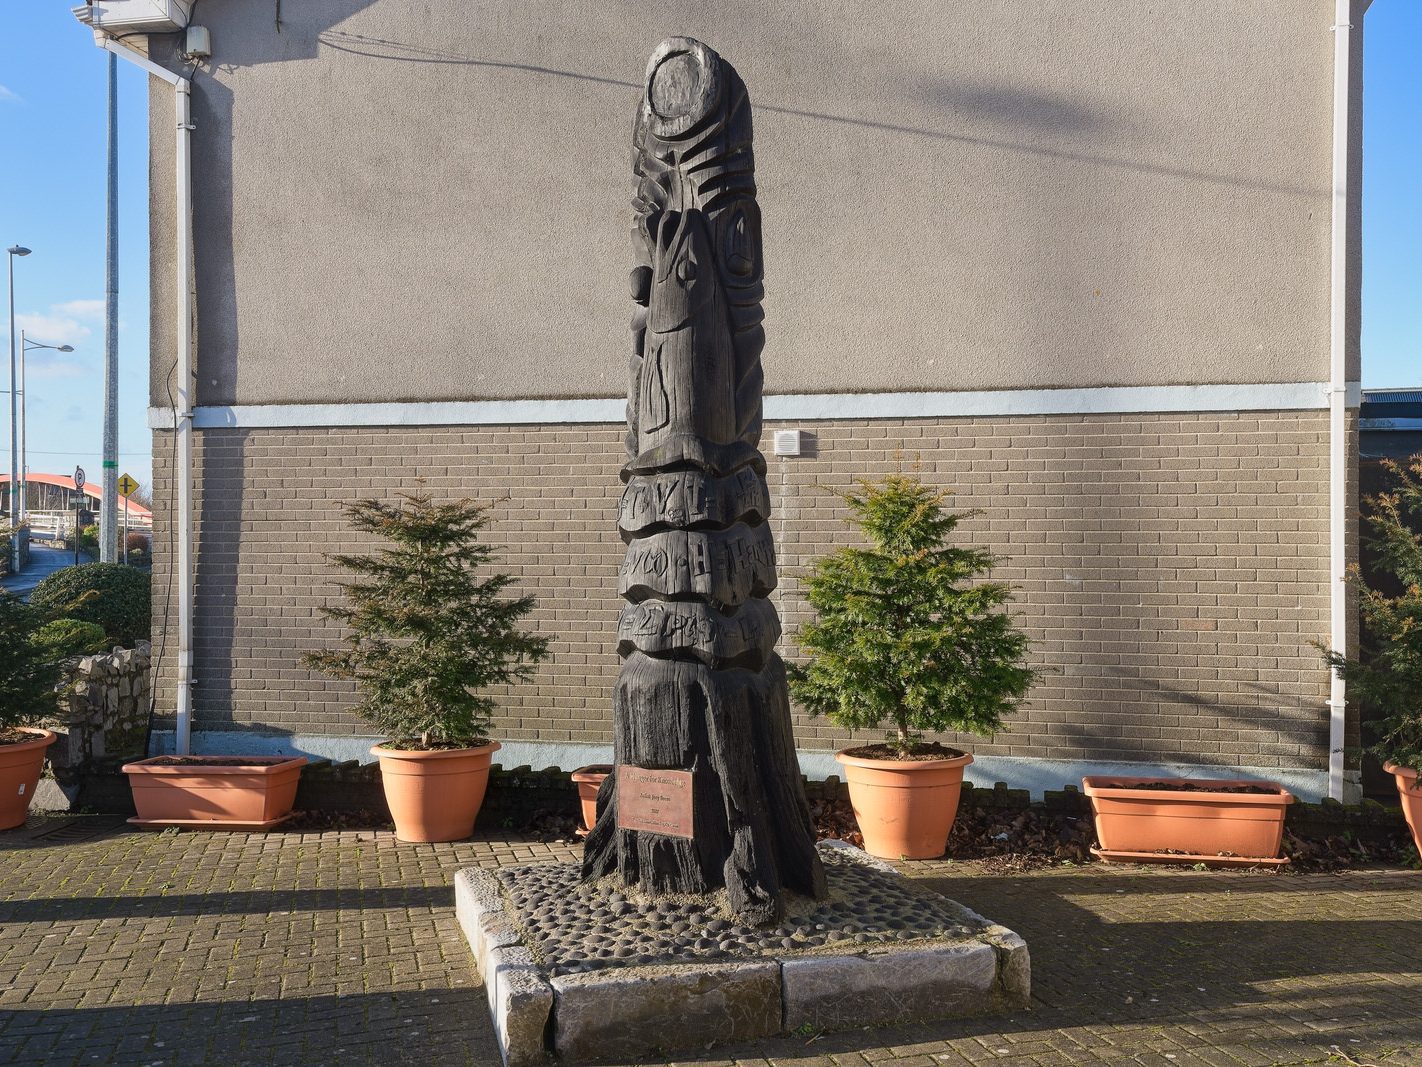 A HUNGER FOR KNOWLEDGE BY JOEY BURNS PLUS A MURAL[A BOG OAK SCULPTURE REPRESENTING THE SALMON OF KNOWLEDGE]-225058-1